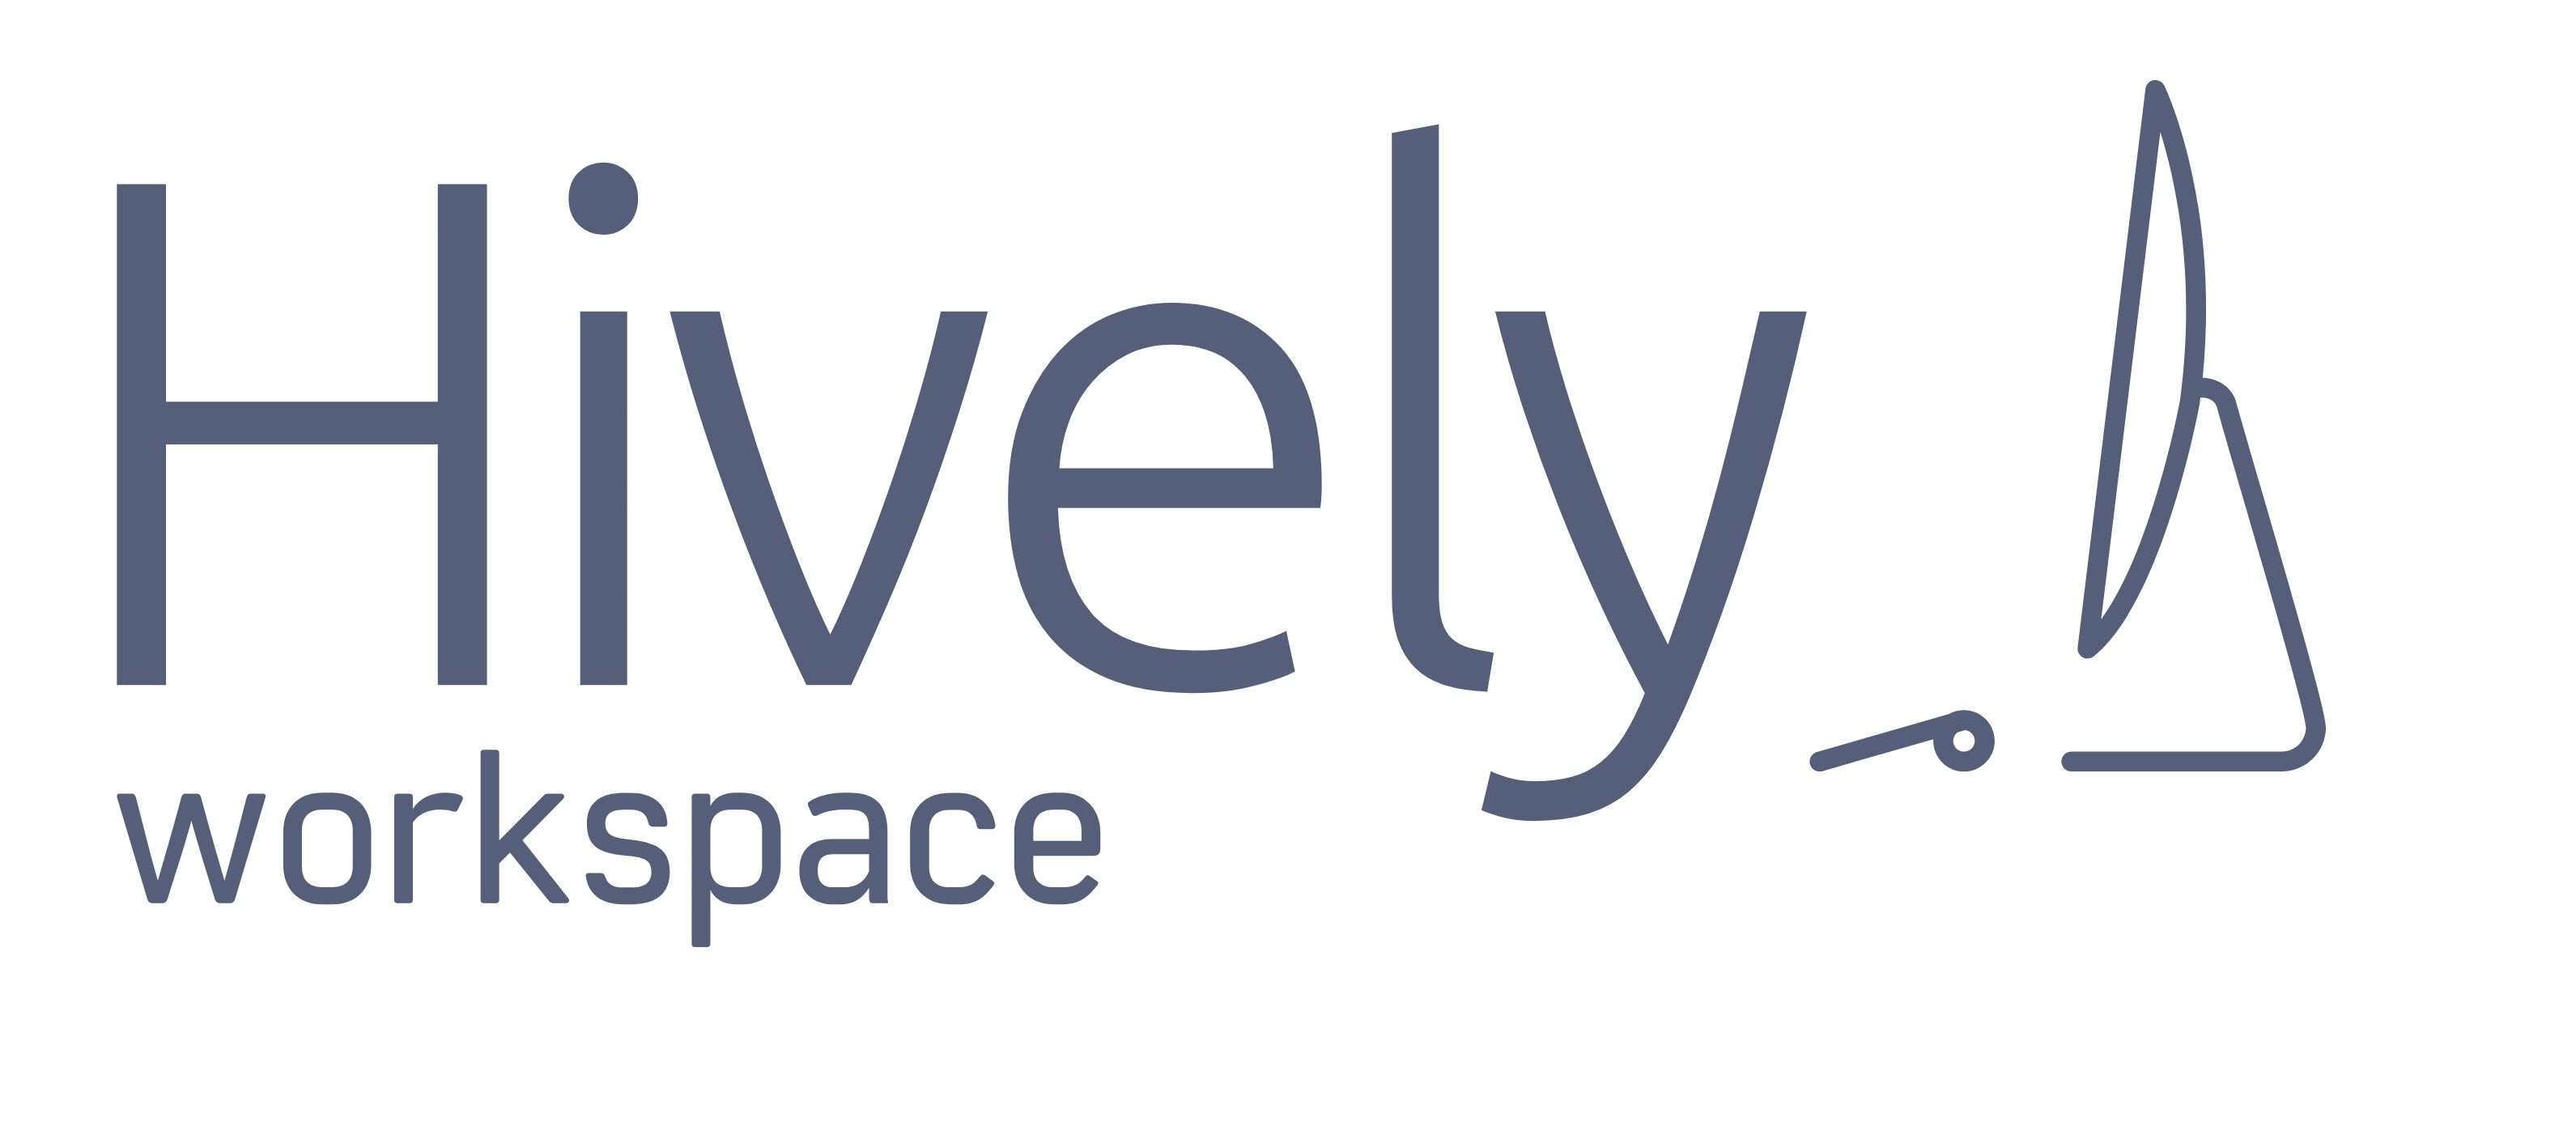 Hively Workspace Logo